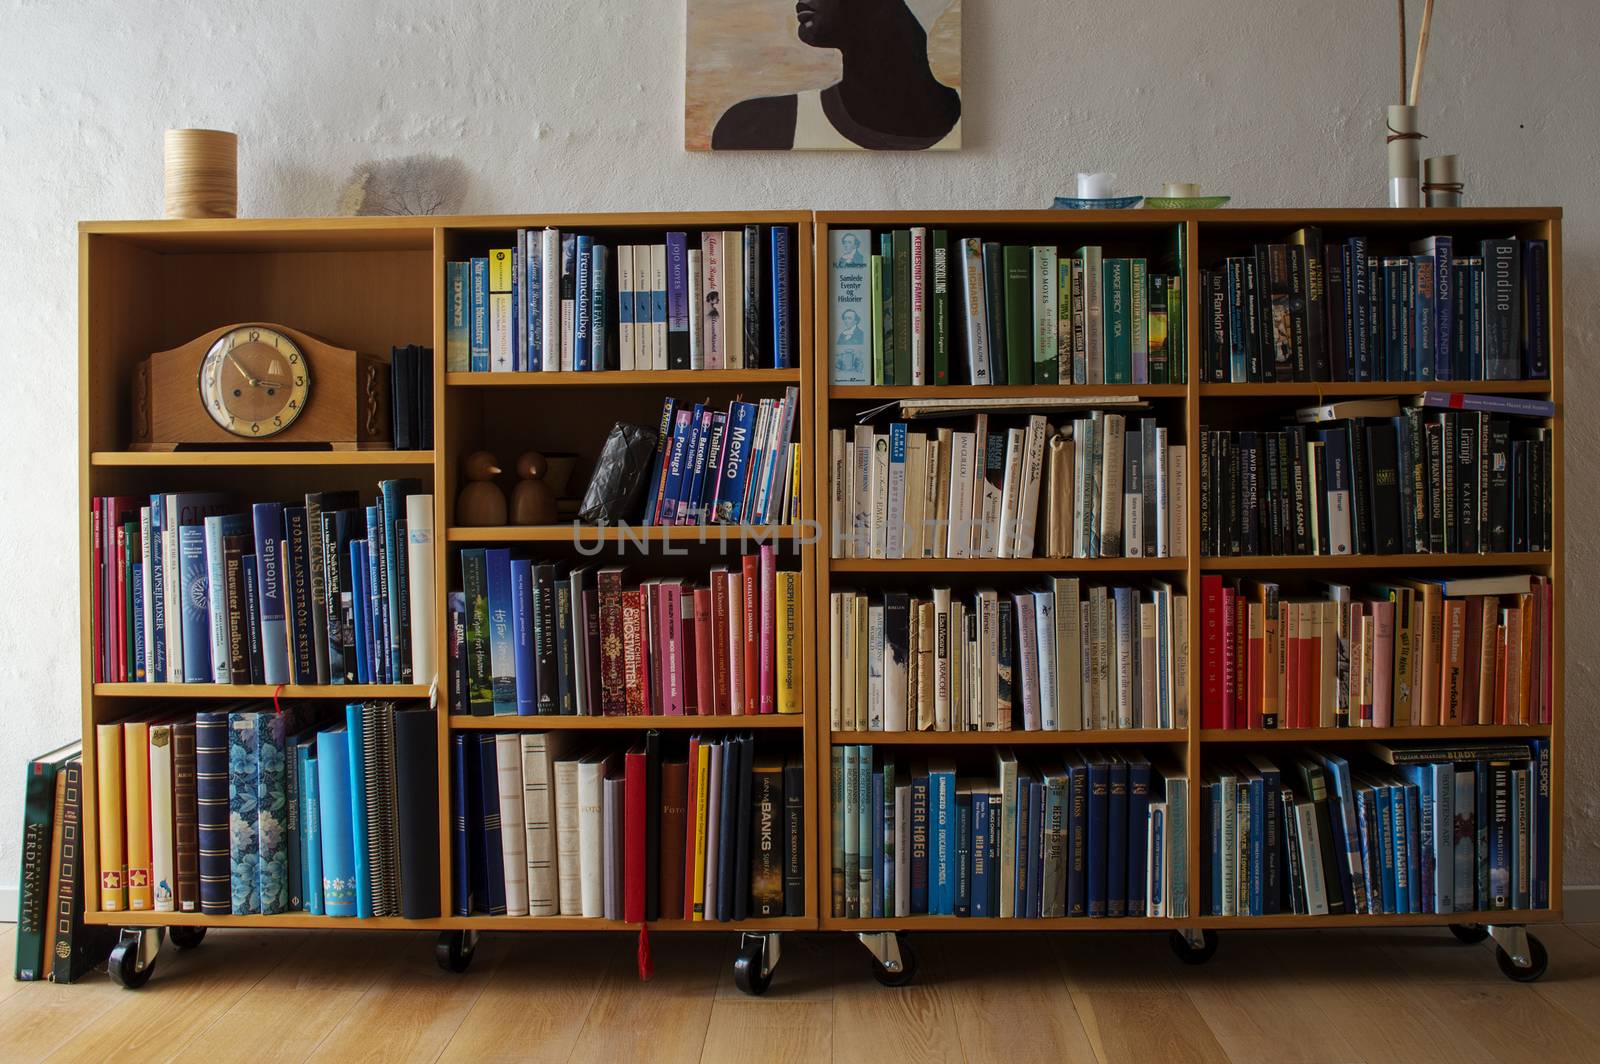 Wooden book shelf with many colorful books and a clock.